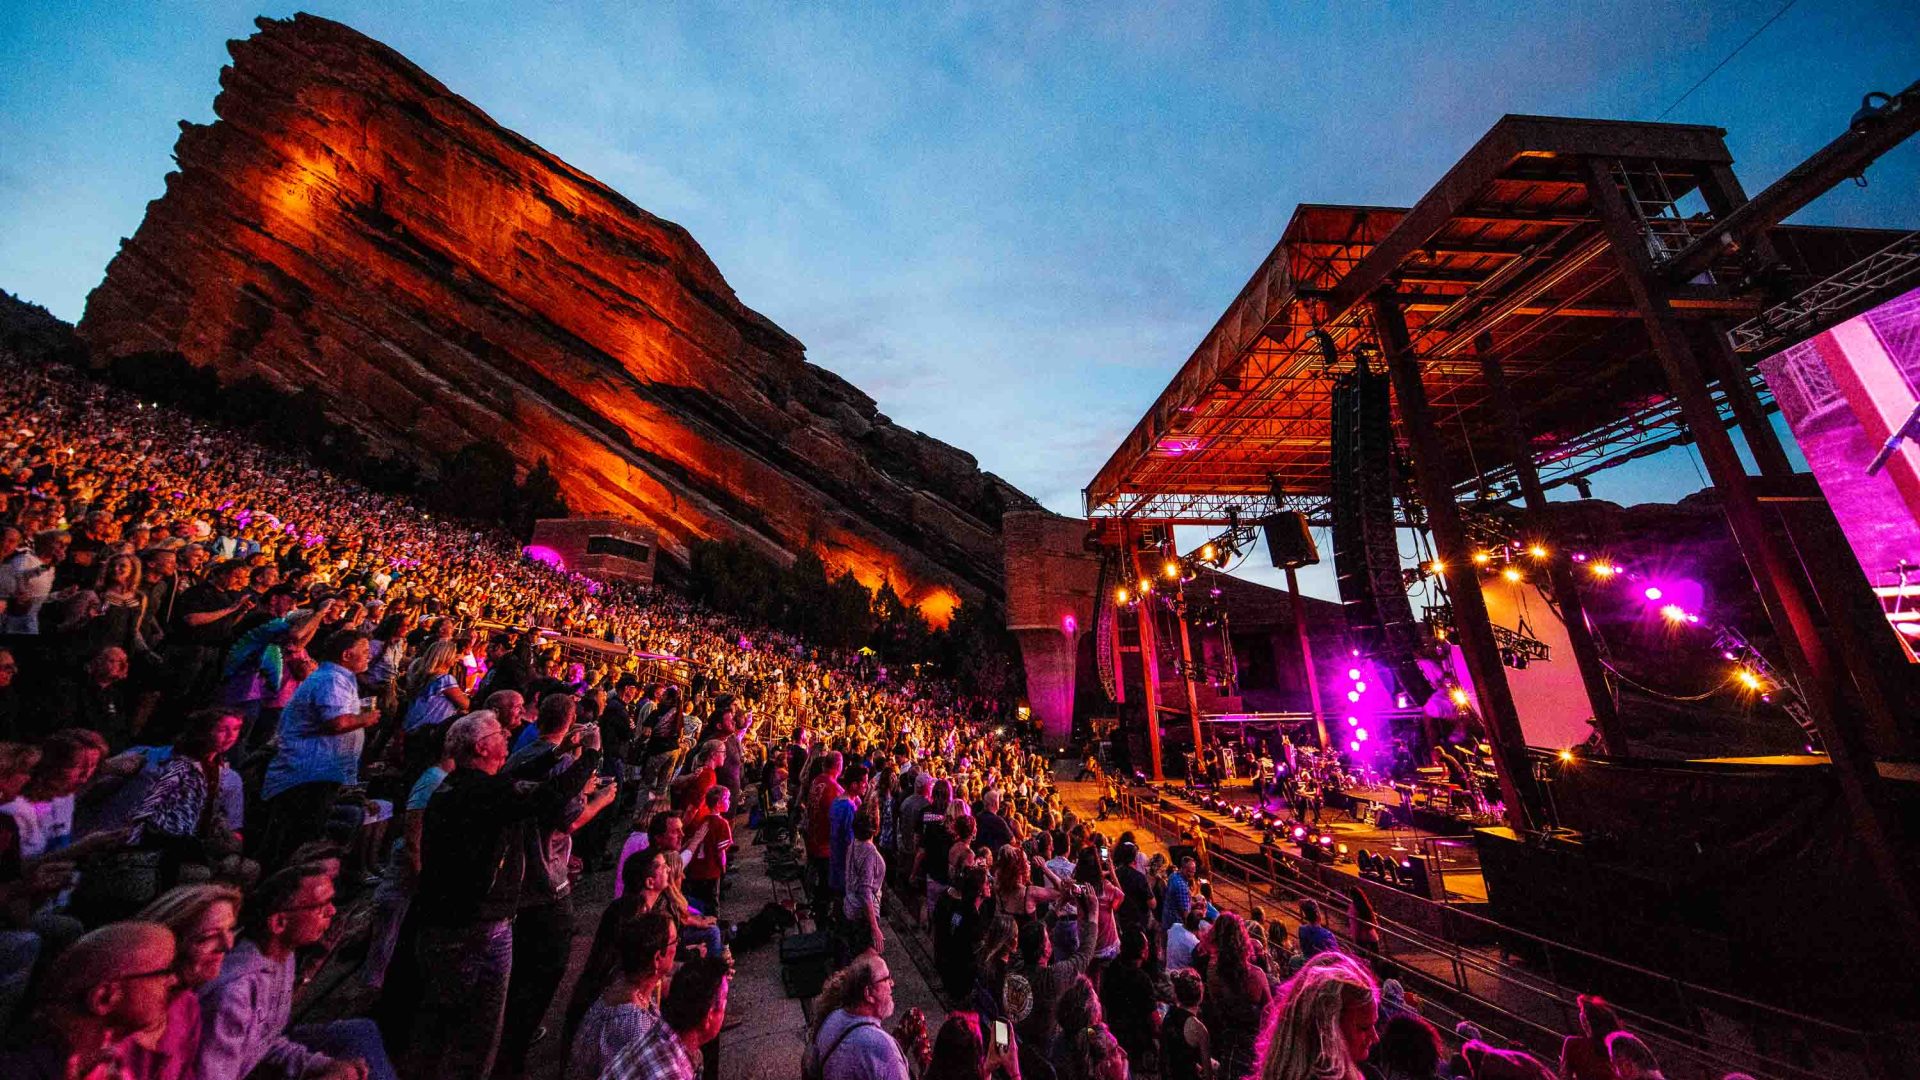 Why does the music sound so good at Colorado’s Red Rocks amphitheater?